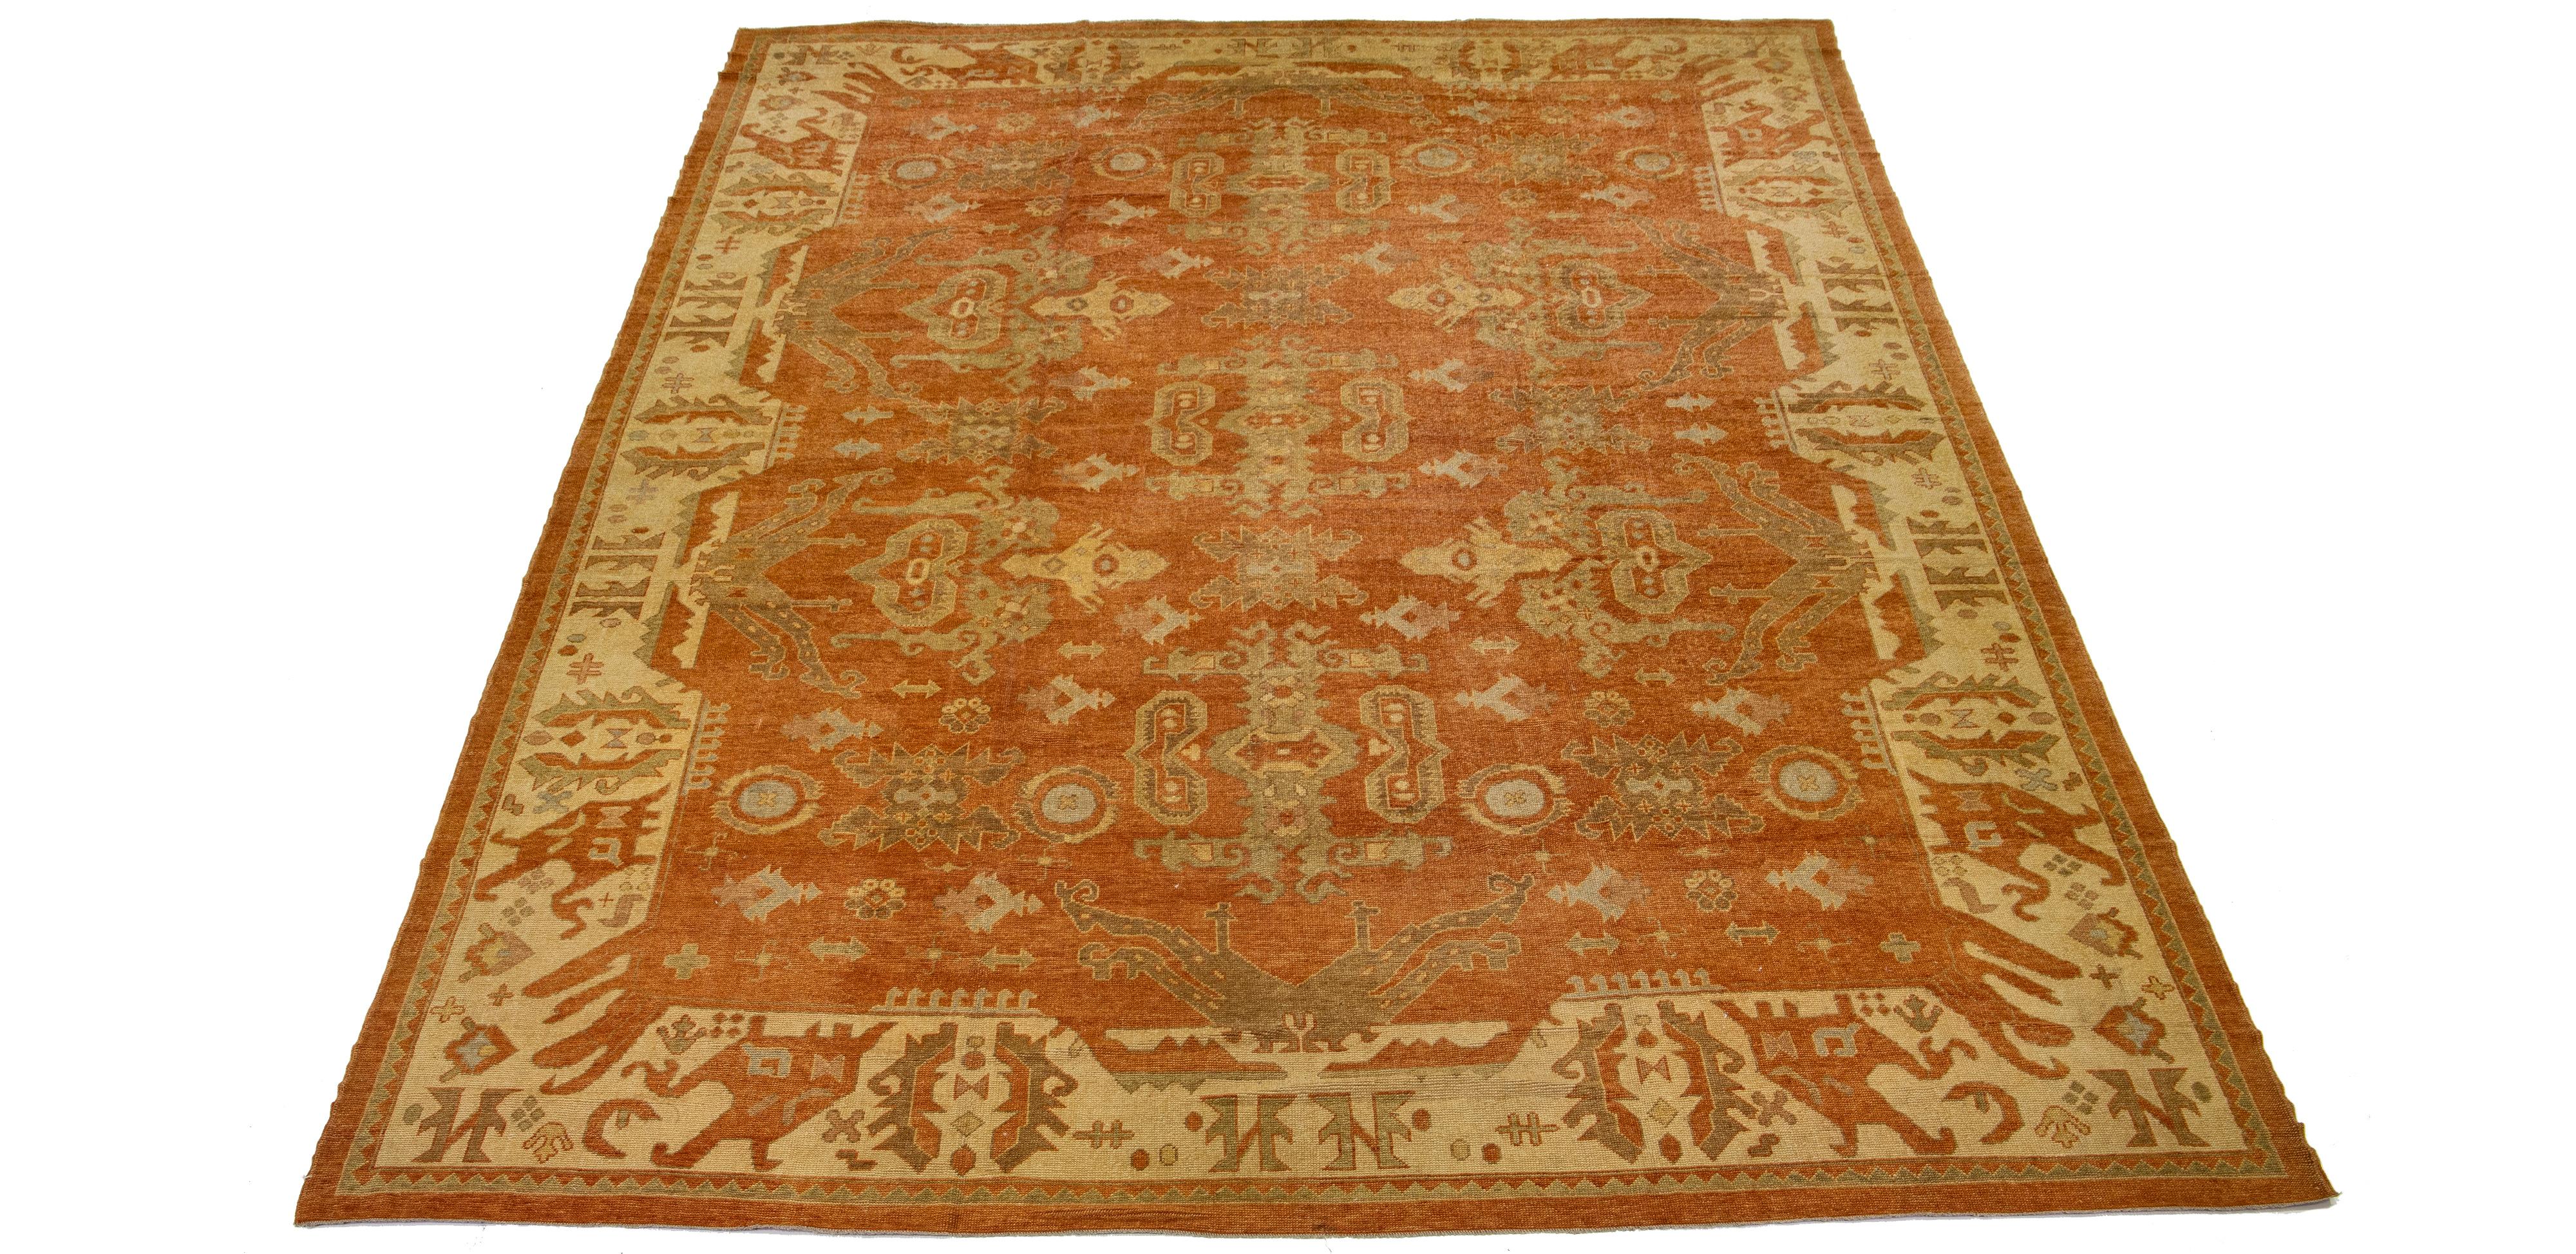 This is a modern, hand-knotted rug featuring a floral design. The primary color is orange-rust, and beige borders surround it.

This rug measures 13'10